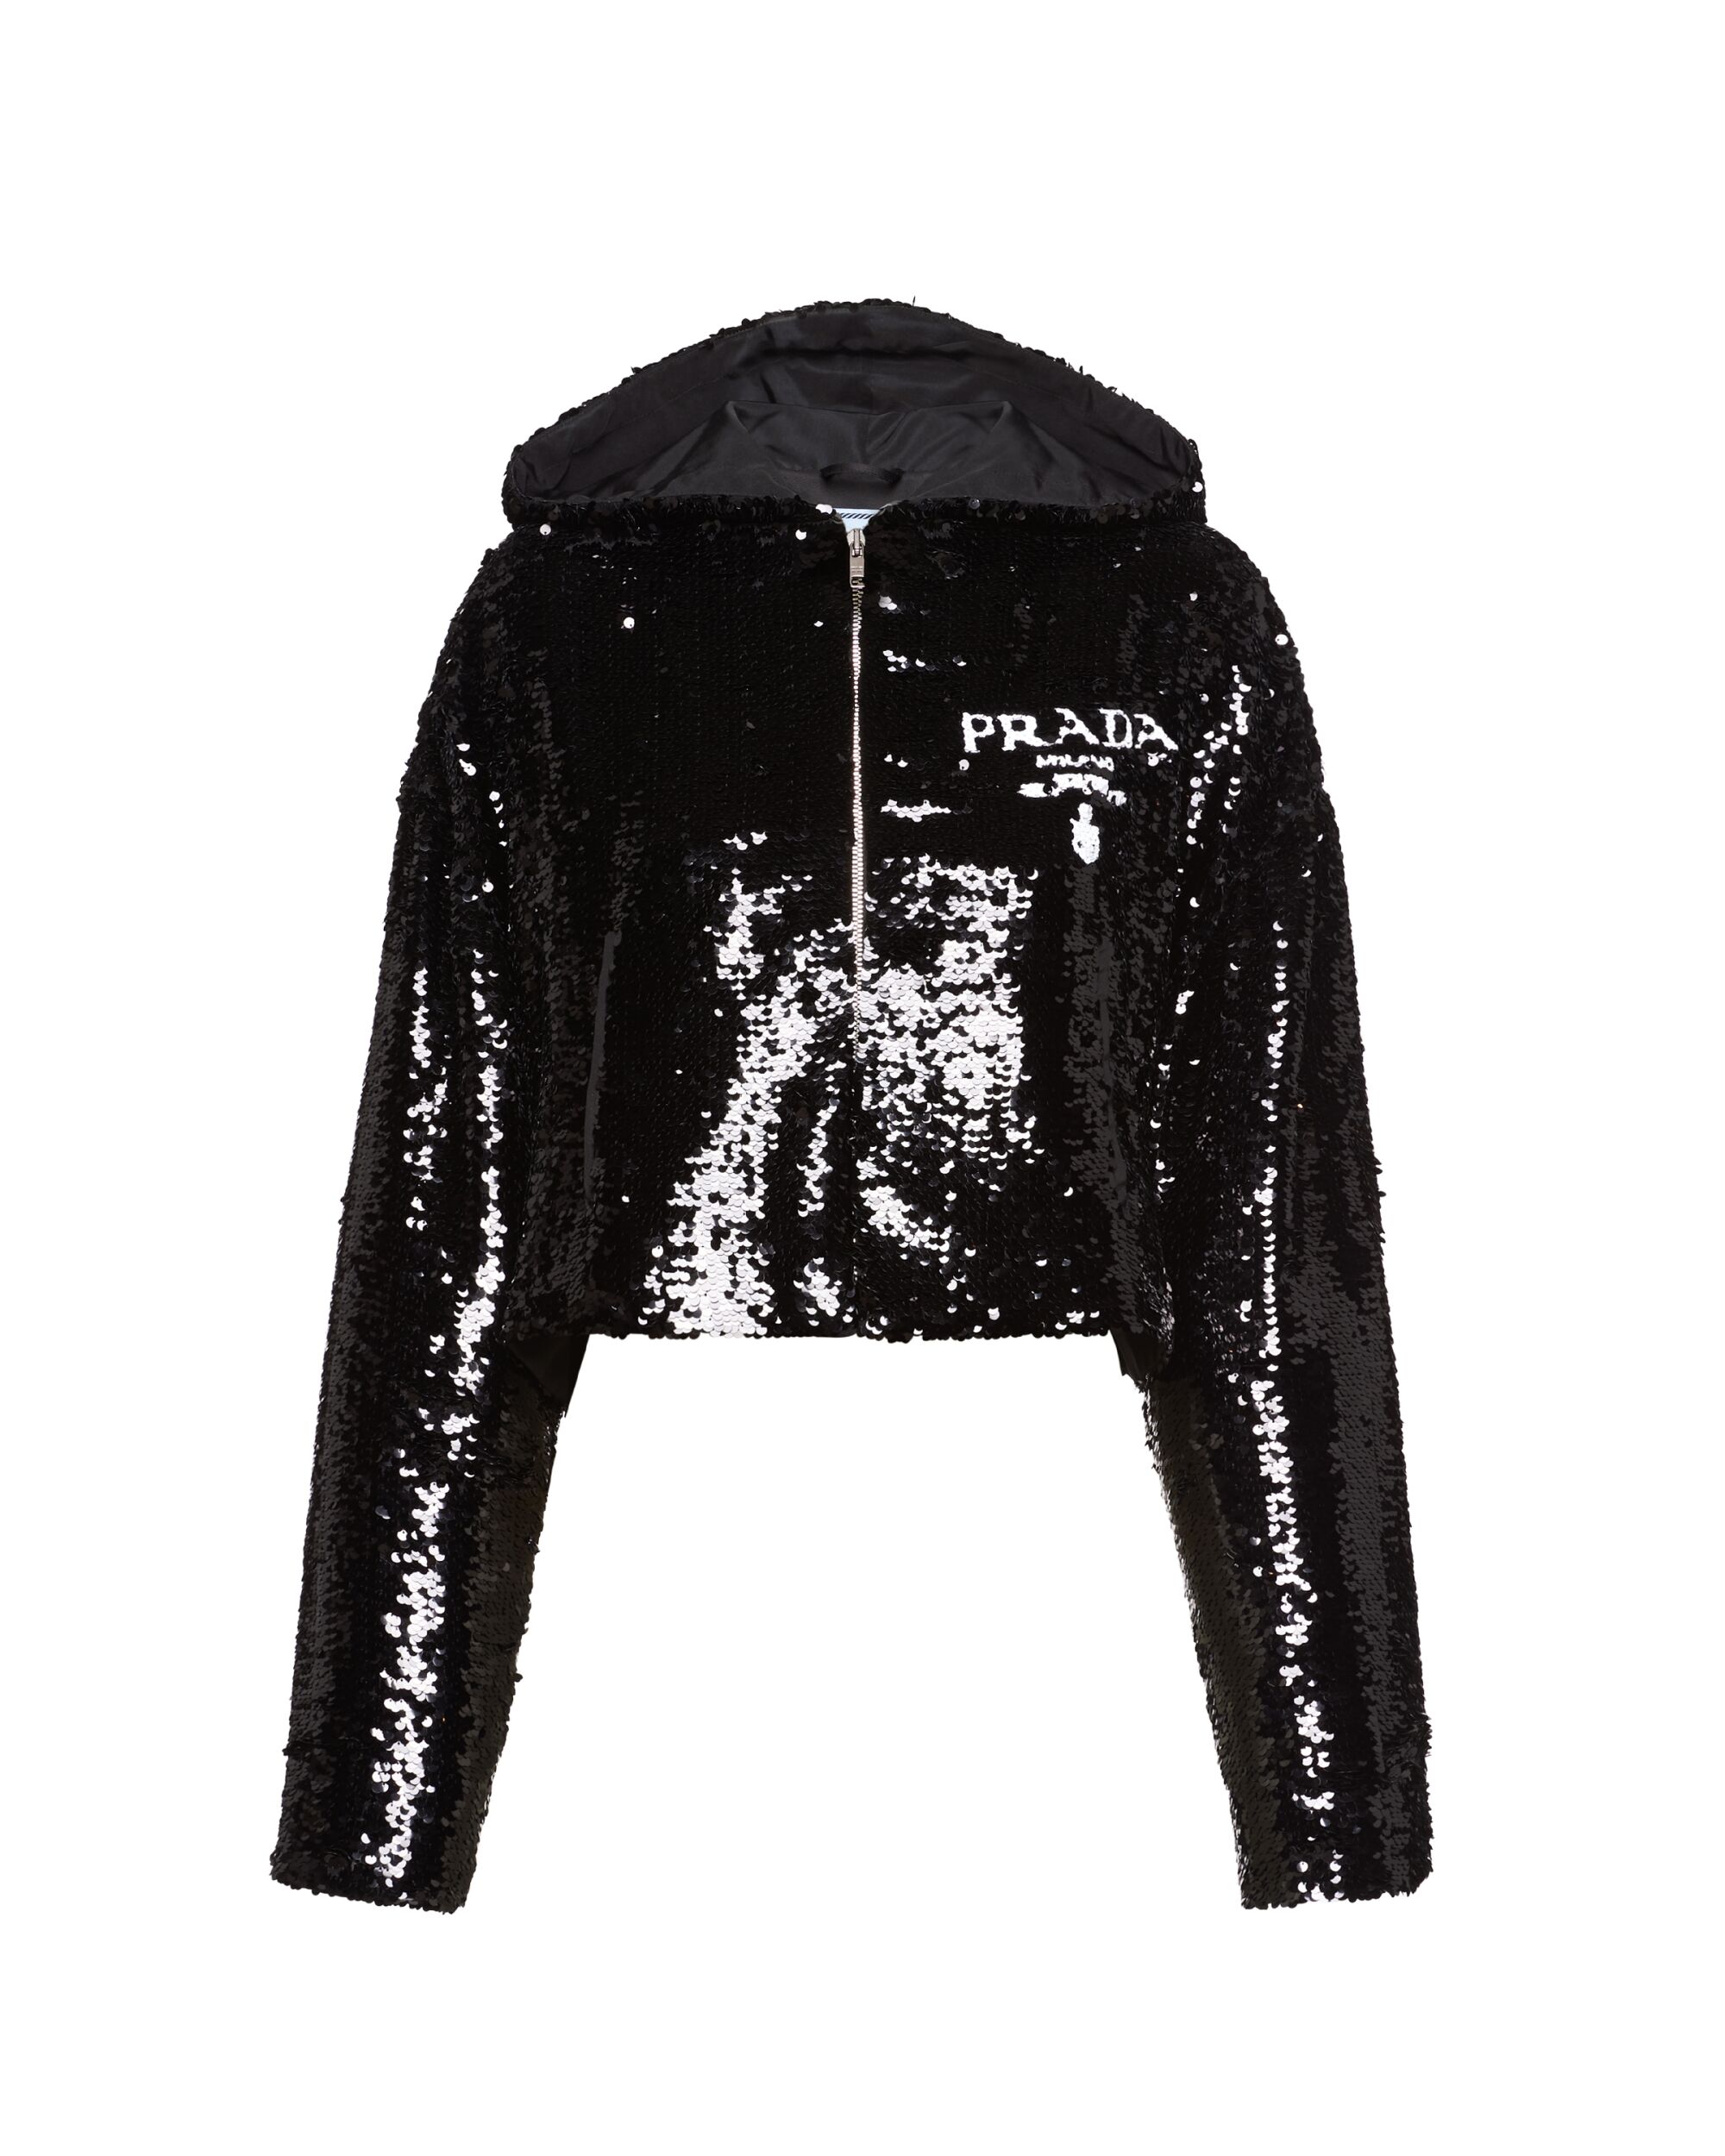 A shiny black sequined hoodie with the word "Prada" in white